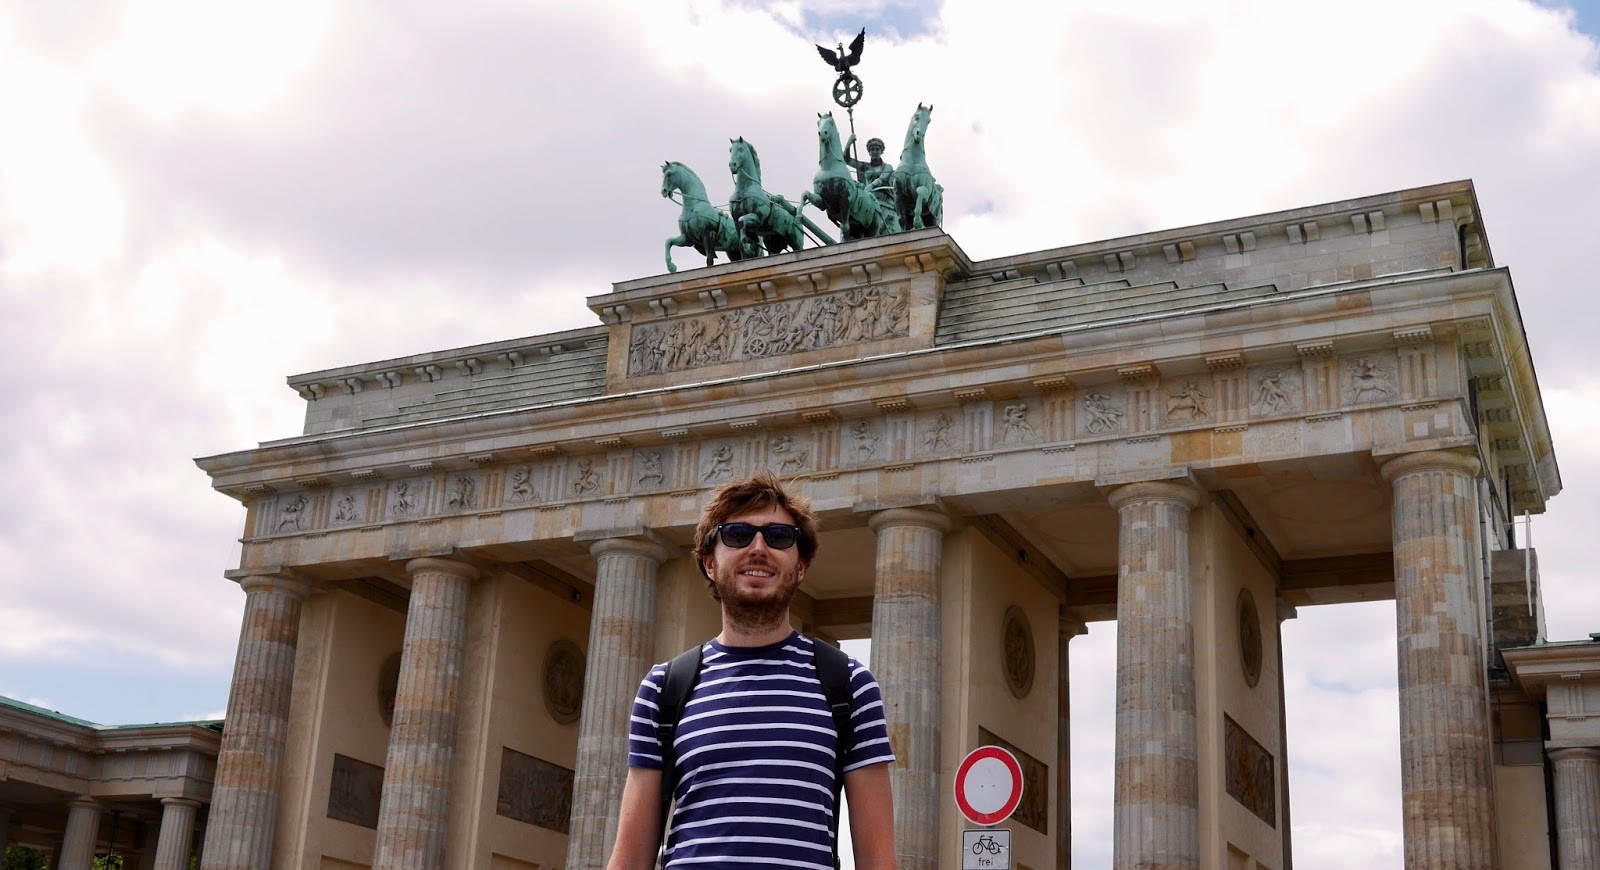 Cal Mc standing at the Brandenburg Gates, by www.CalMcTravels.com. Cal McTravels